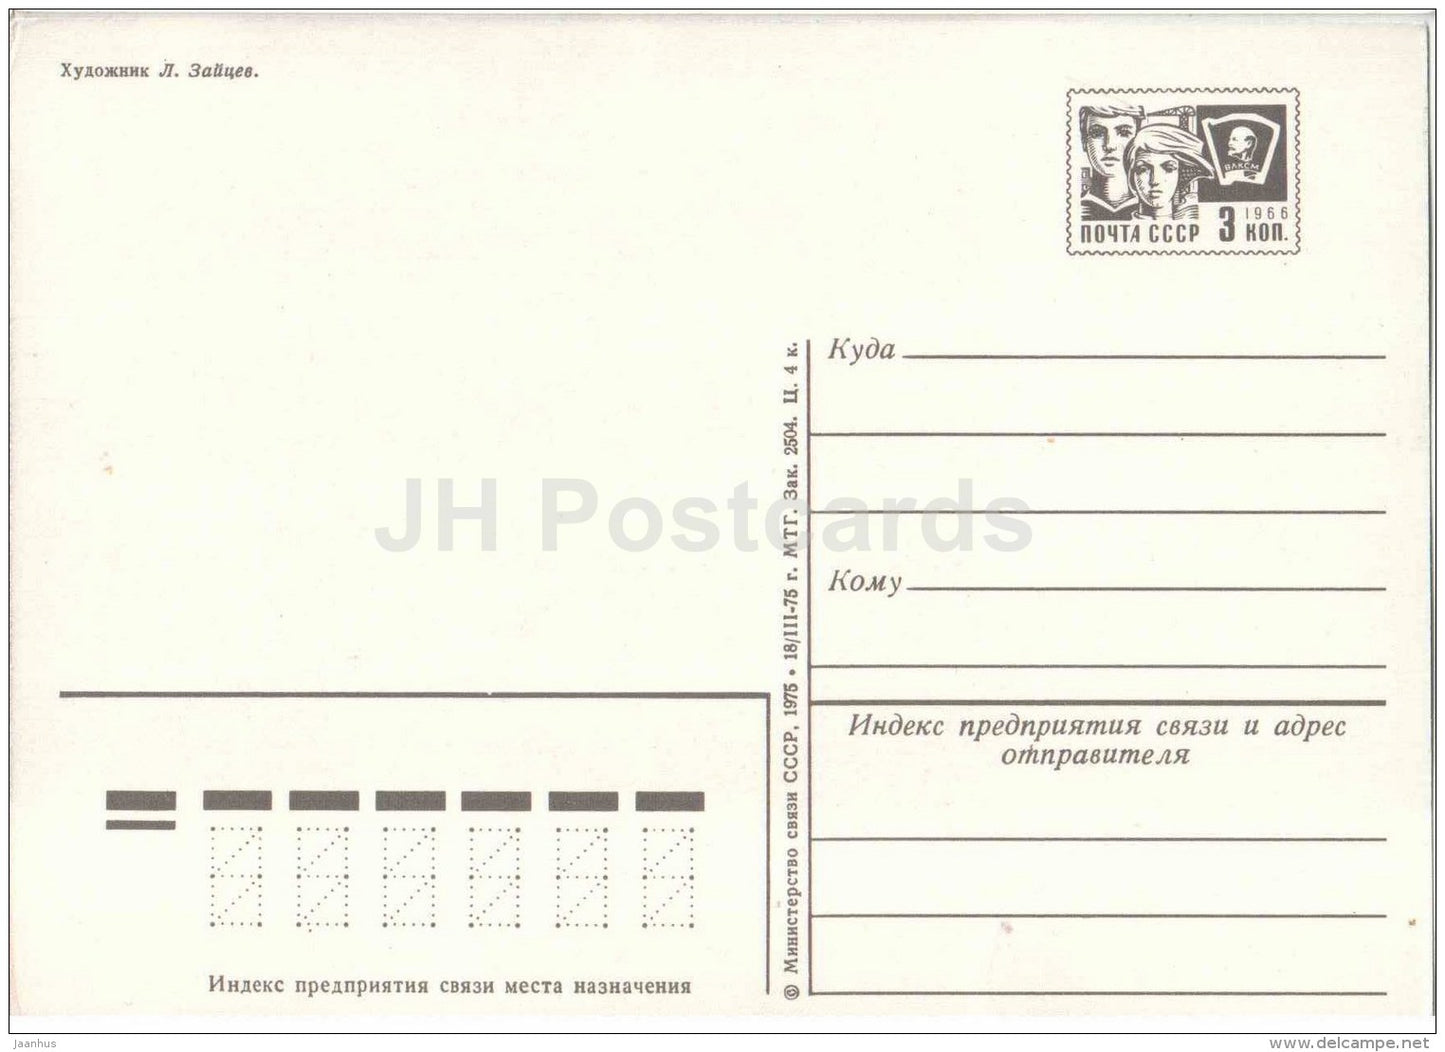 New Year Greeting card by L. Zaytsev - troika - horses - Ded Moroz - postal stationery - 1975 - Russia USSR - unused - JH Postcards